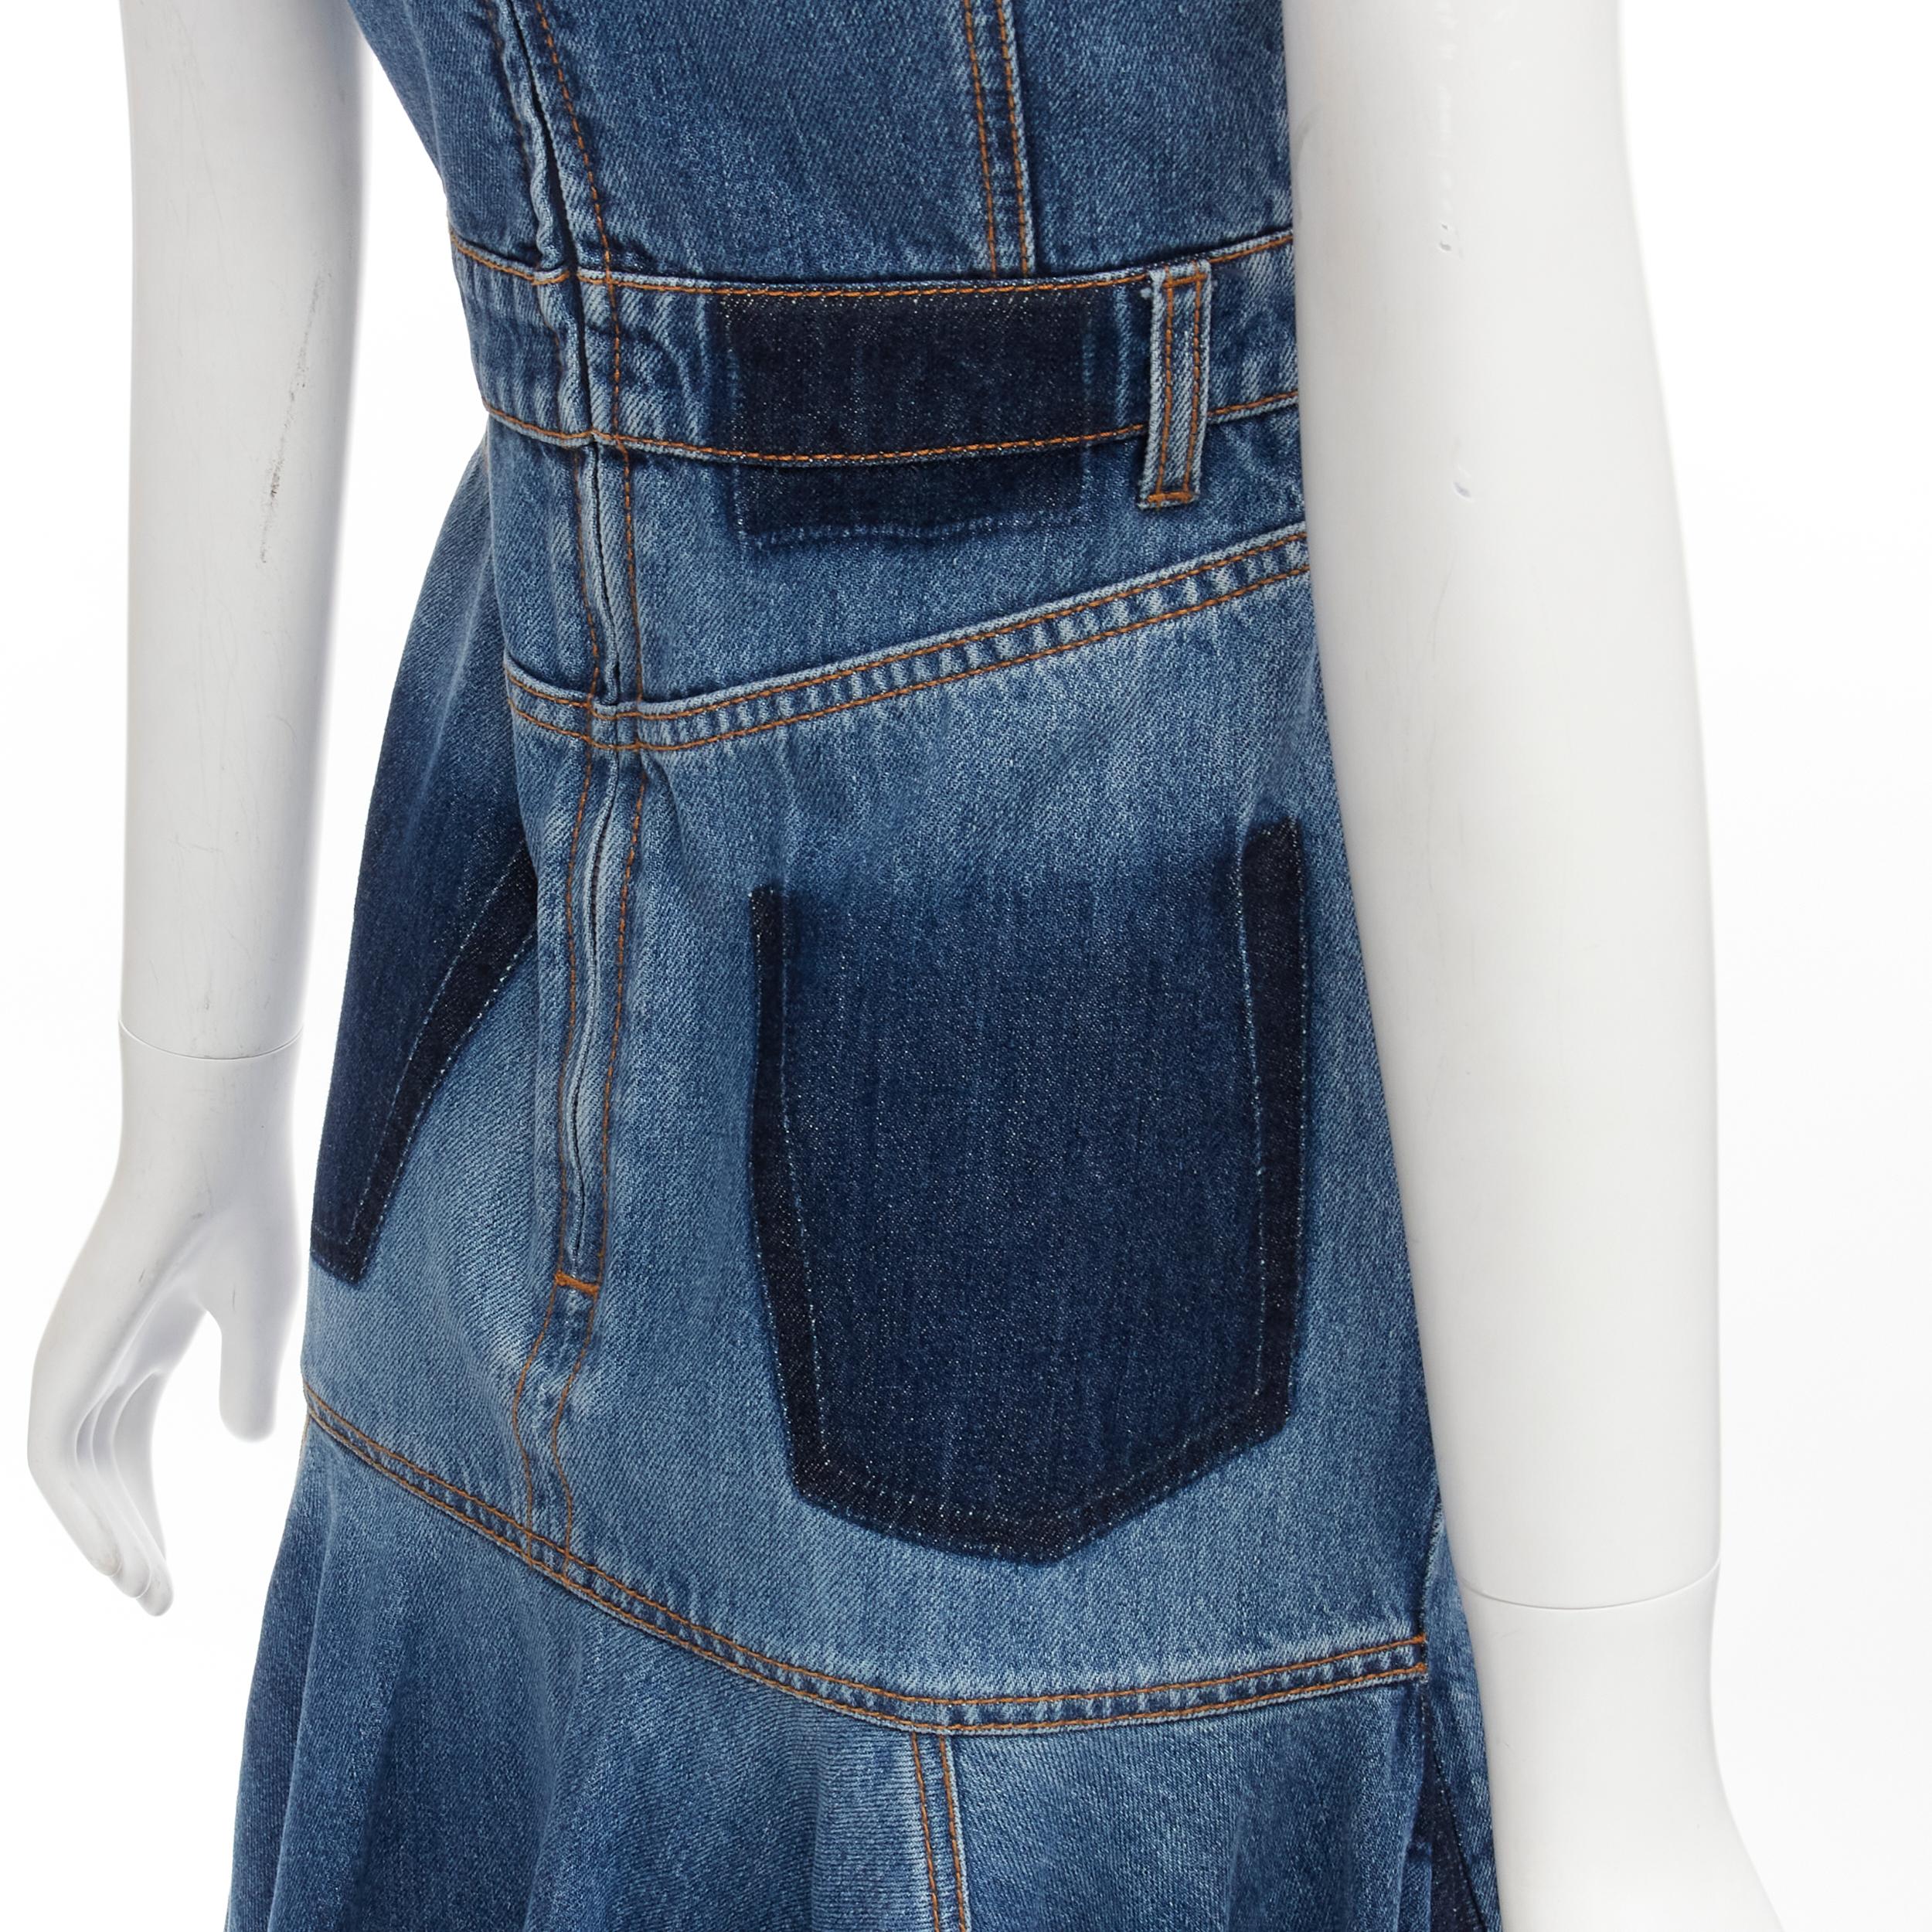 ALEXANDER MCQUEEN 2021 Runway washed denim shadow bodice midi dress IT38 XS
Brand: Alexander McQueen
Collection: 2021 Fall Winter Runway
Material: Denim
Color: Blue
Pattern: Solid
Closure: Zip
Extra Detail: Another sophisticated interpretation using